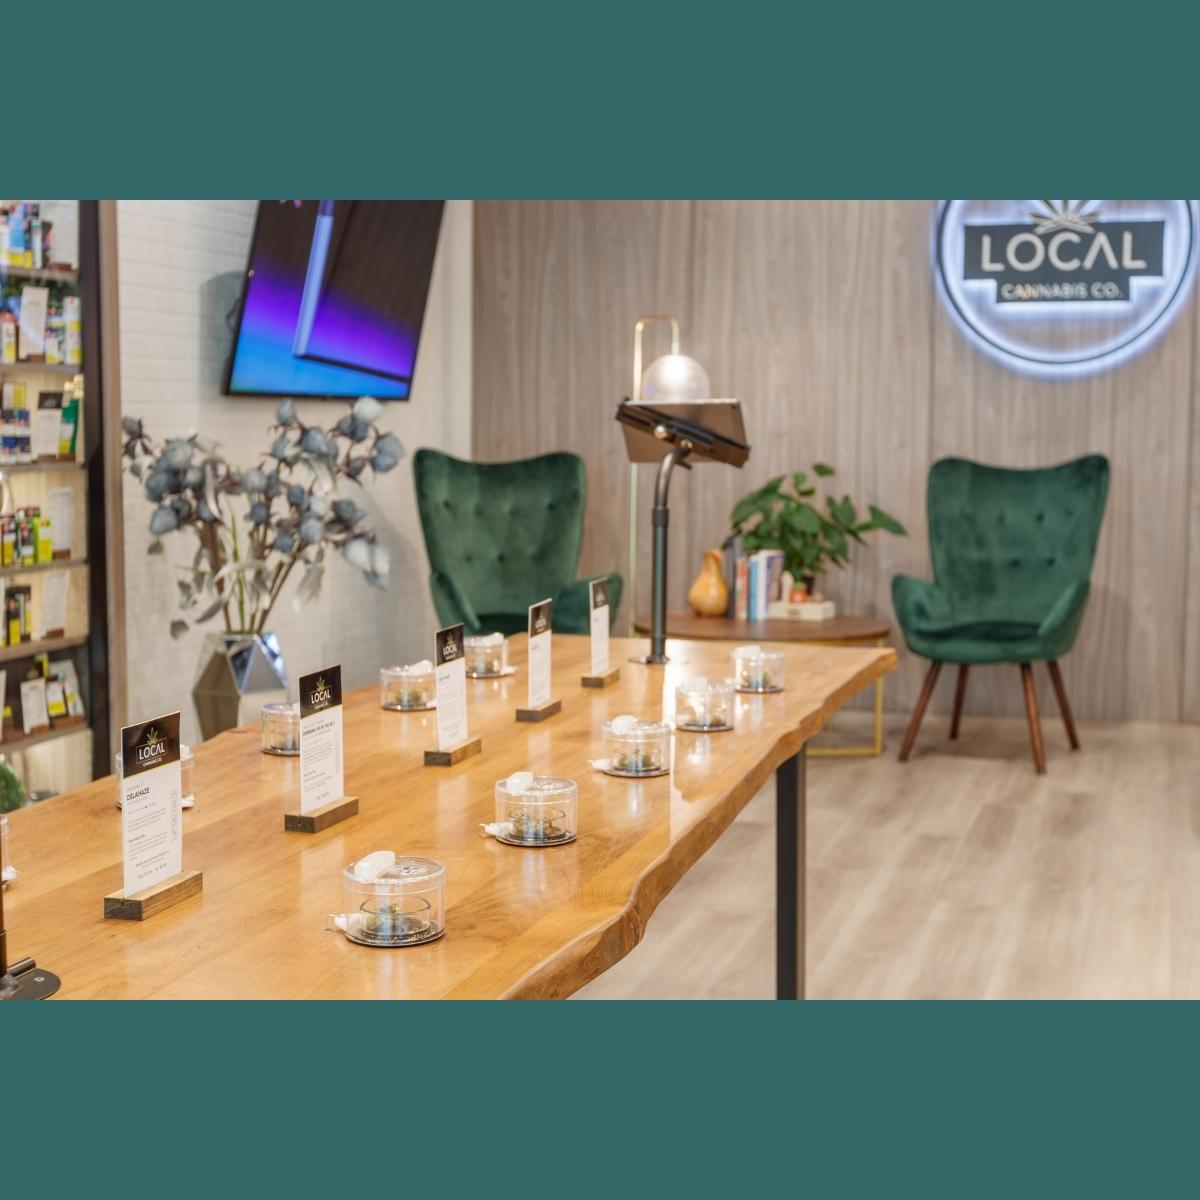 Store image for Local Cannabis Co. - Parksville, 491 Island Hwy E., Parksville BC